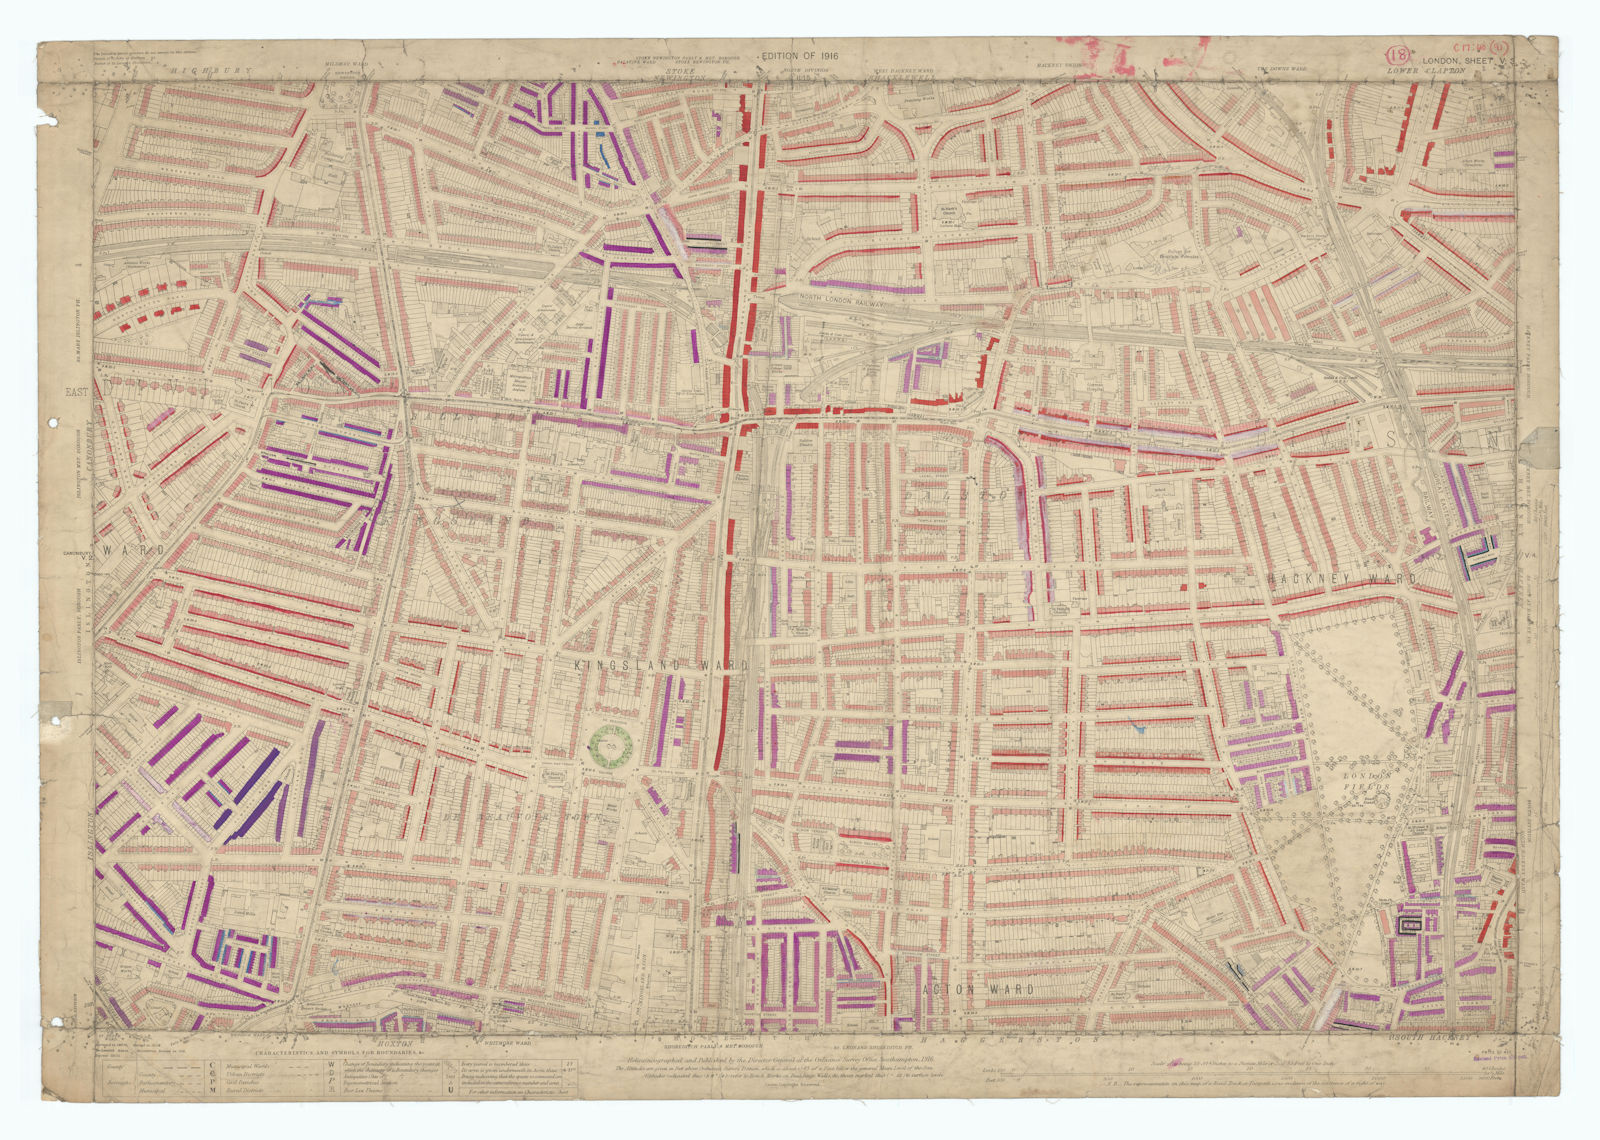 LSE POVERTY OS PROOF MAP Hackney Downs - Kingsland - Dalston - Haggerston 1928